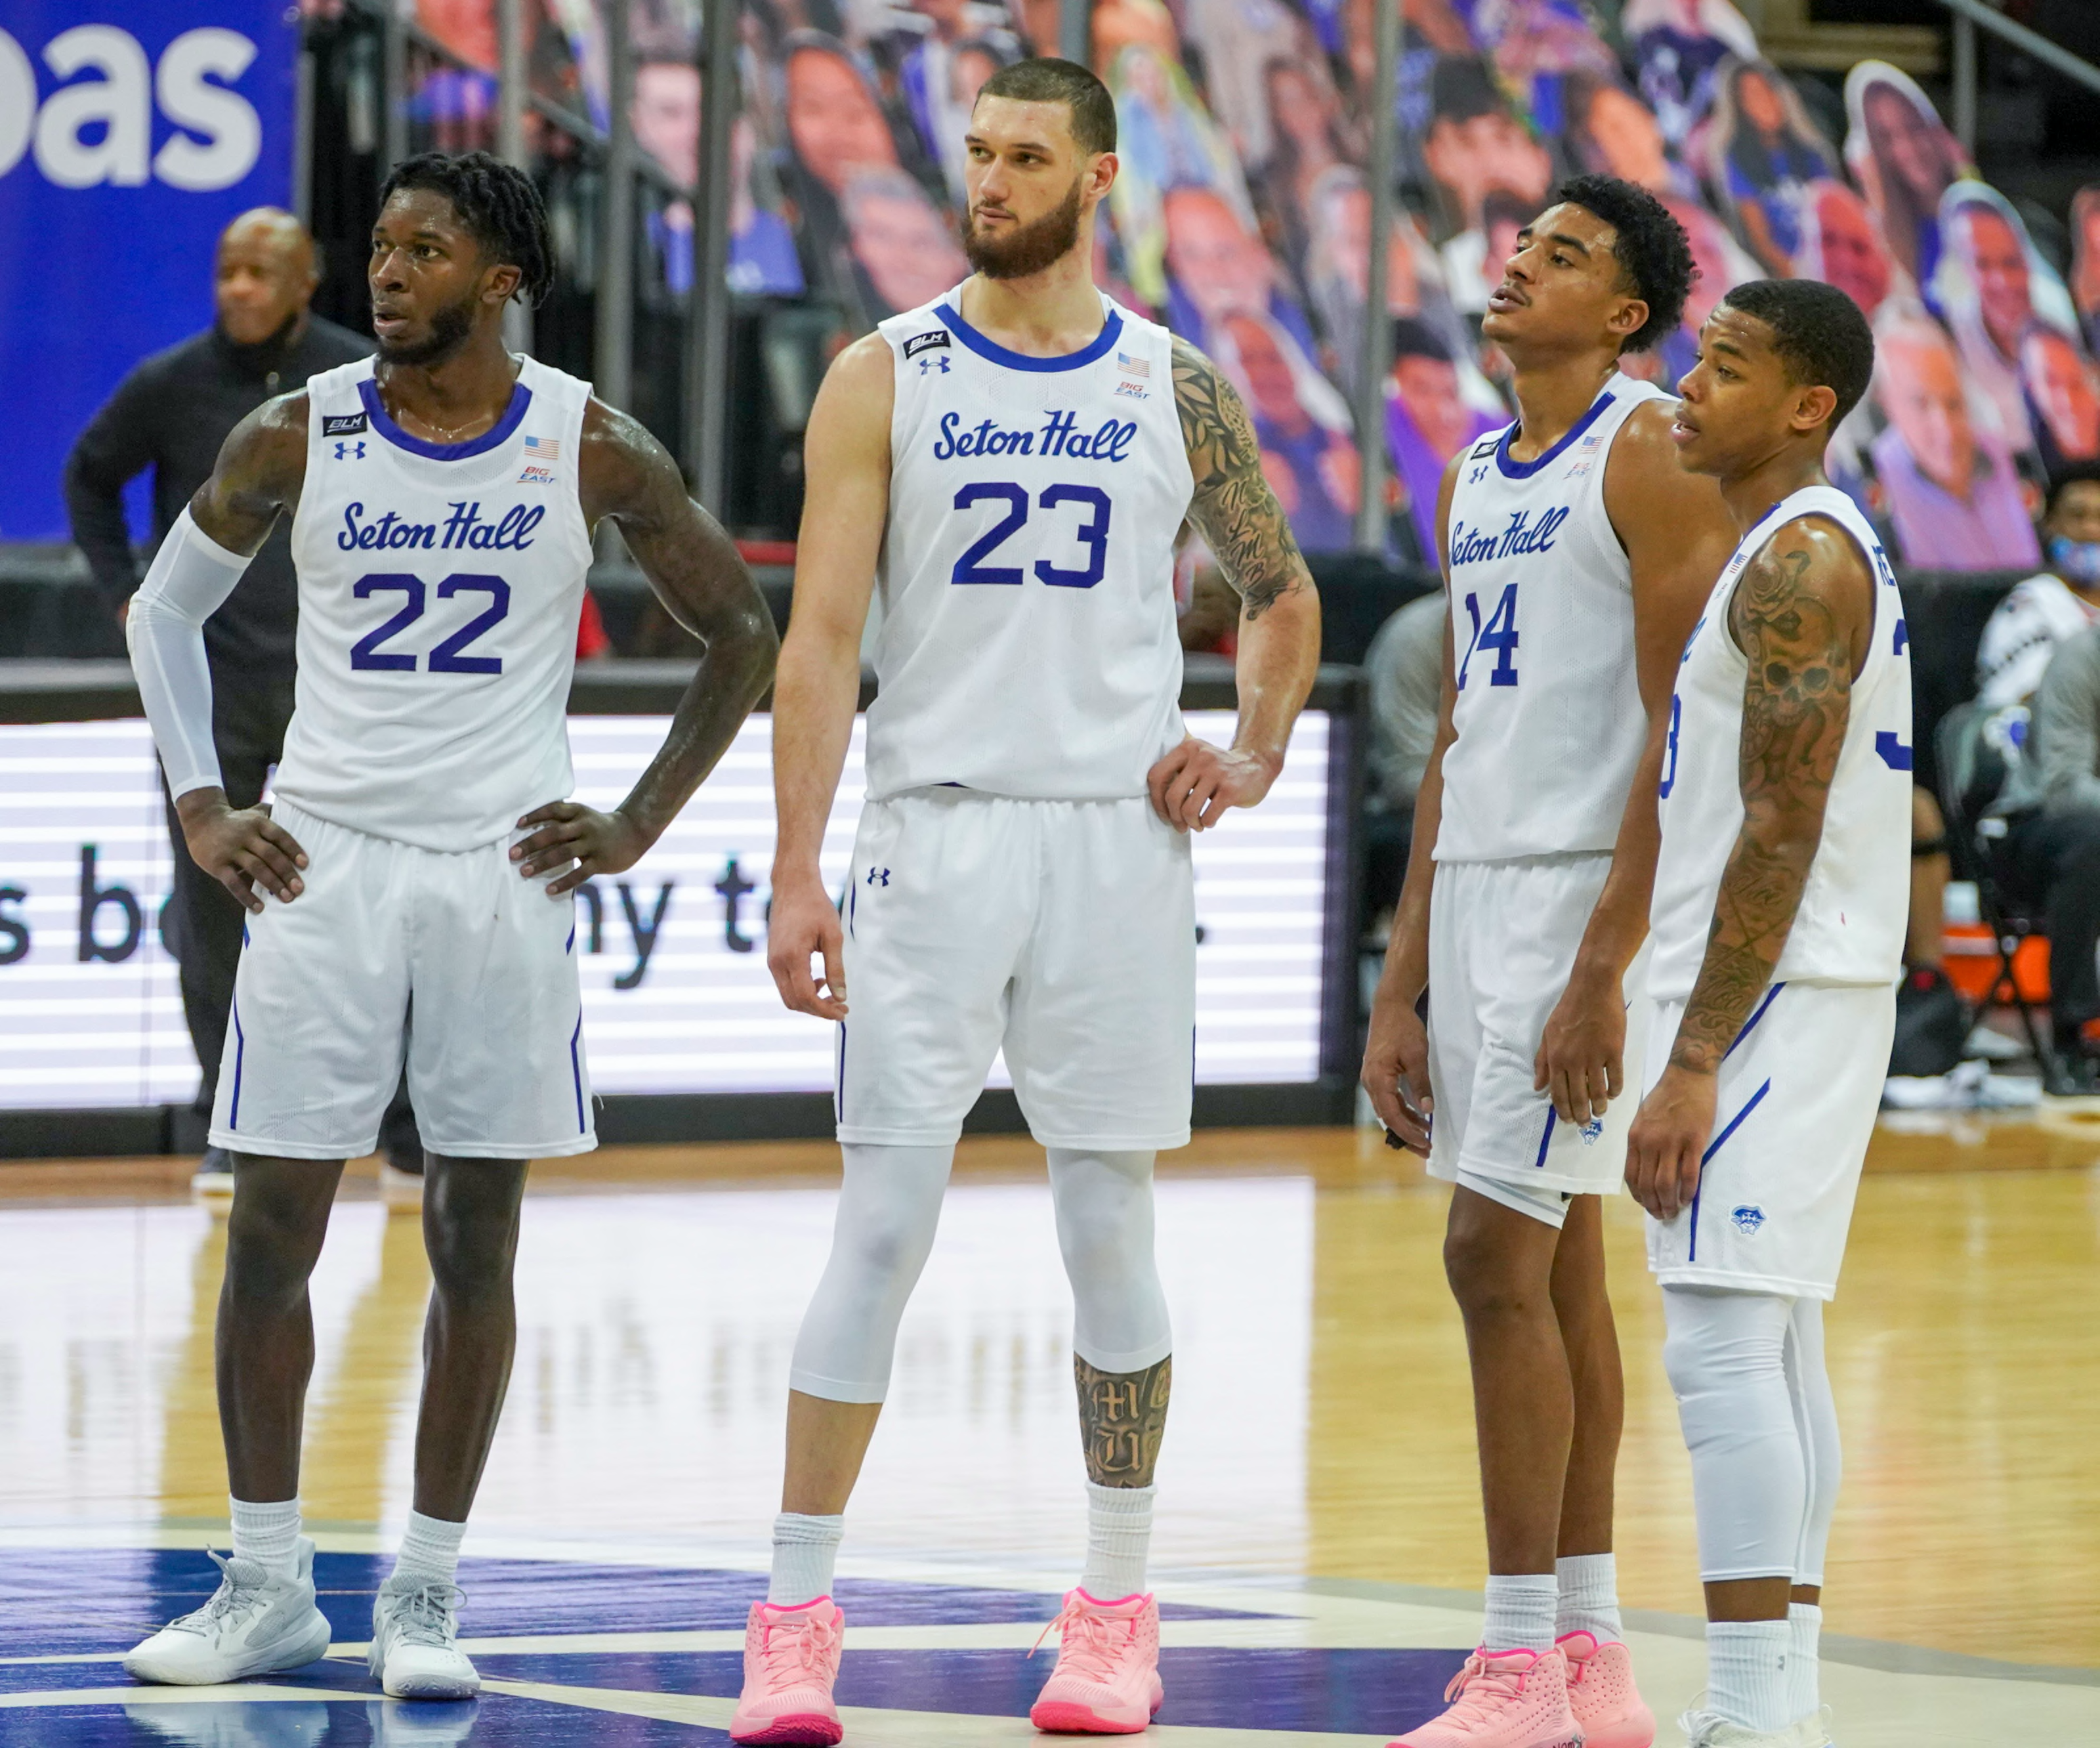 Seton Hall Basketball 3 takeaways from blowout loss to Creighton